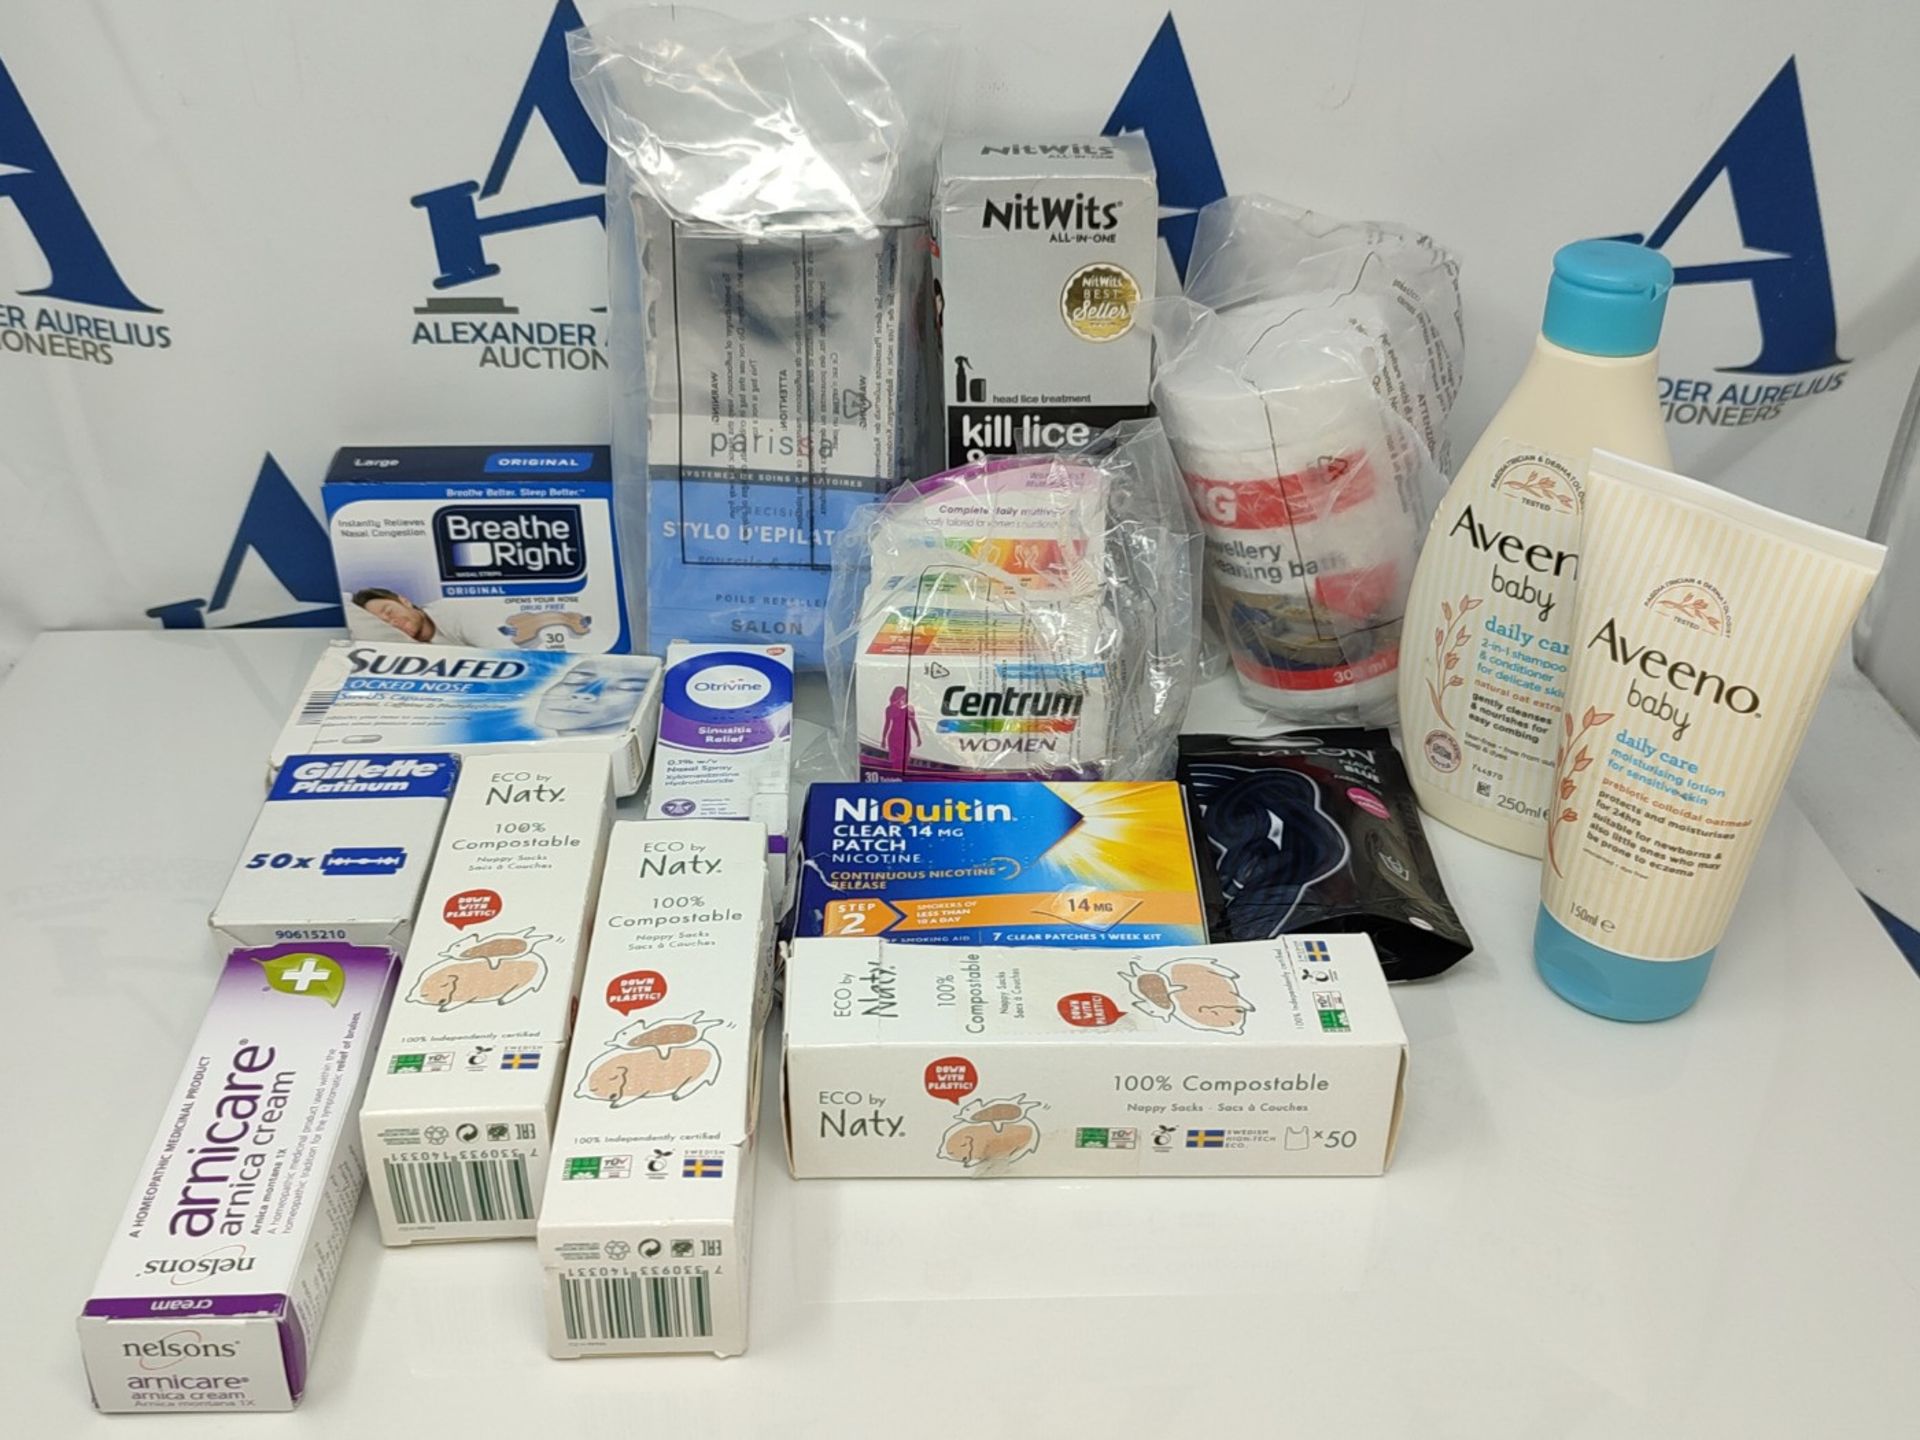 16 items of Pharmaceutical products and personal care: Aveeno, Gillette, Centrum and m